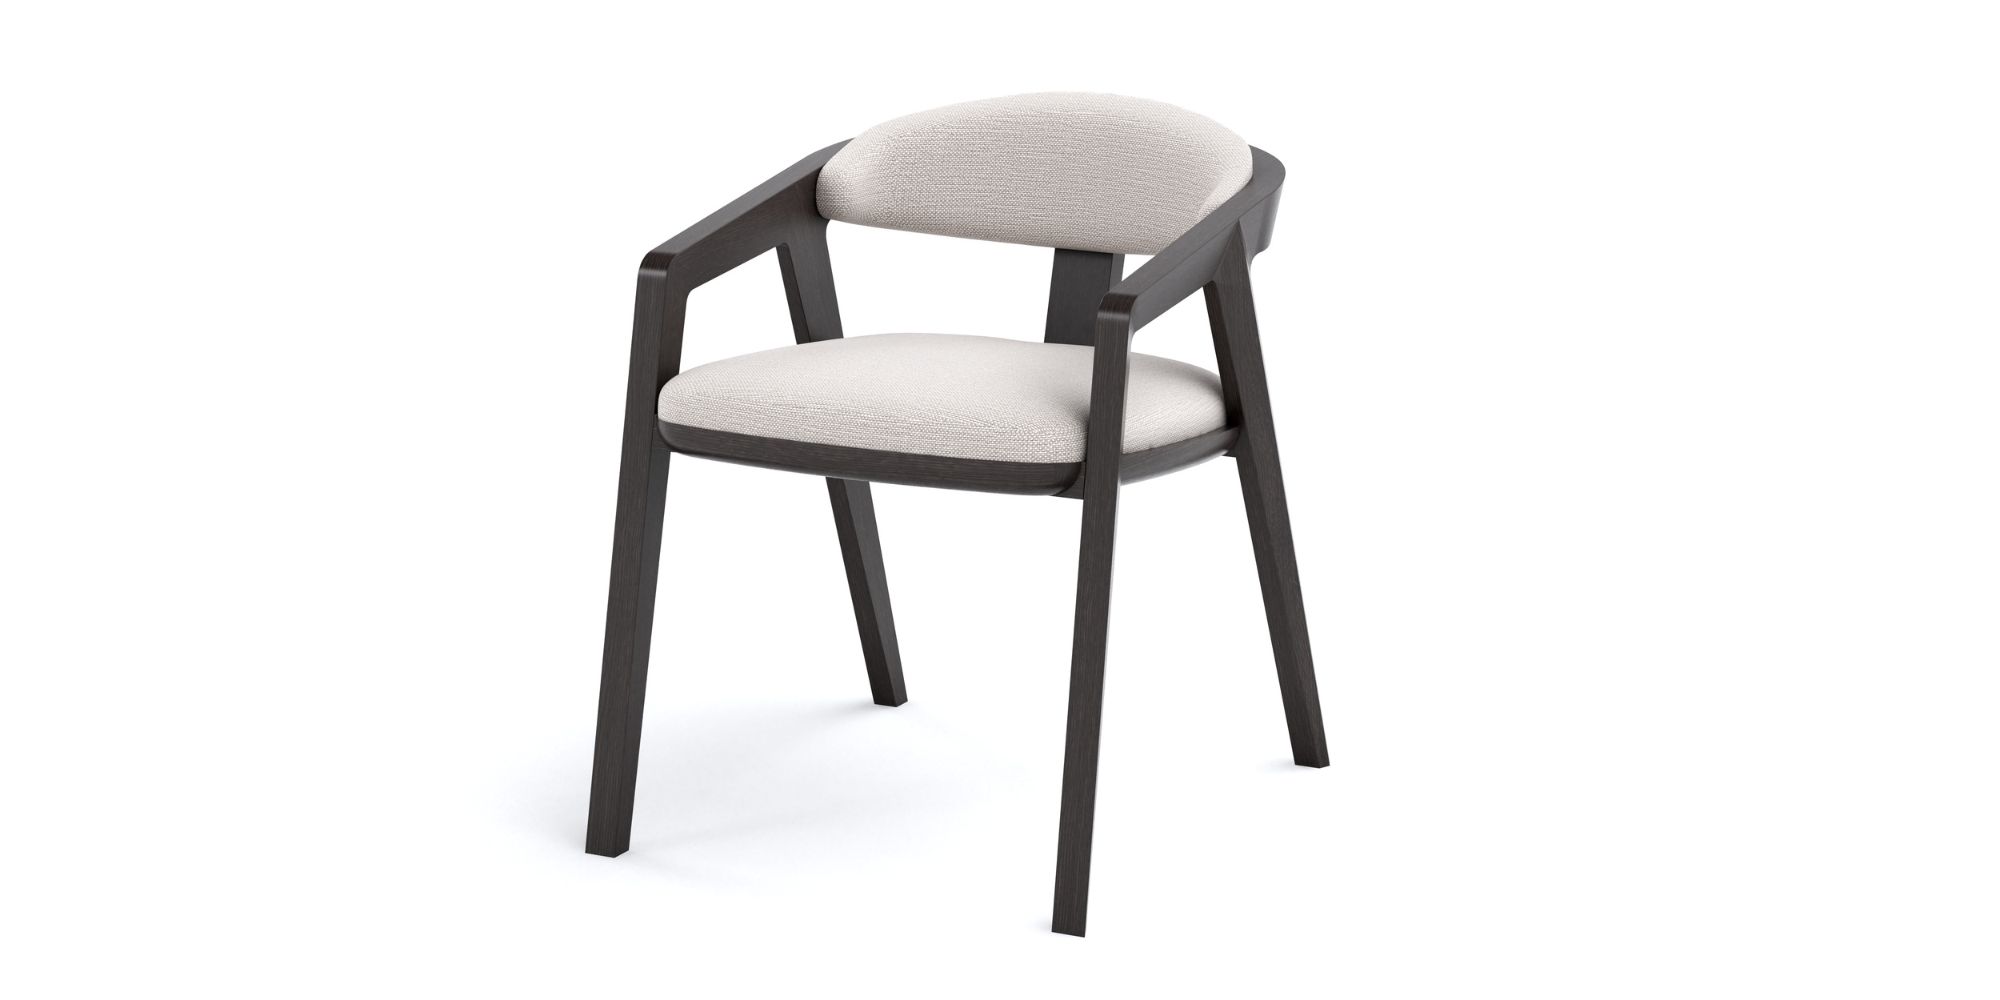 Porto Dining Chair in Outdoor Dining Chairs for Porto collection